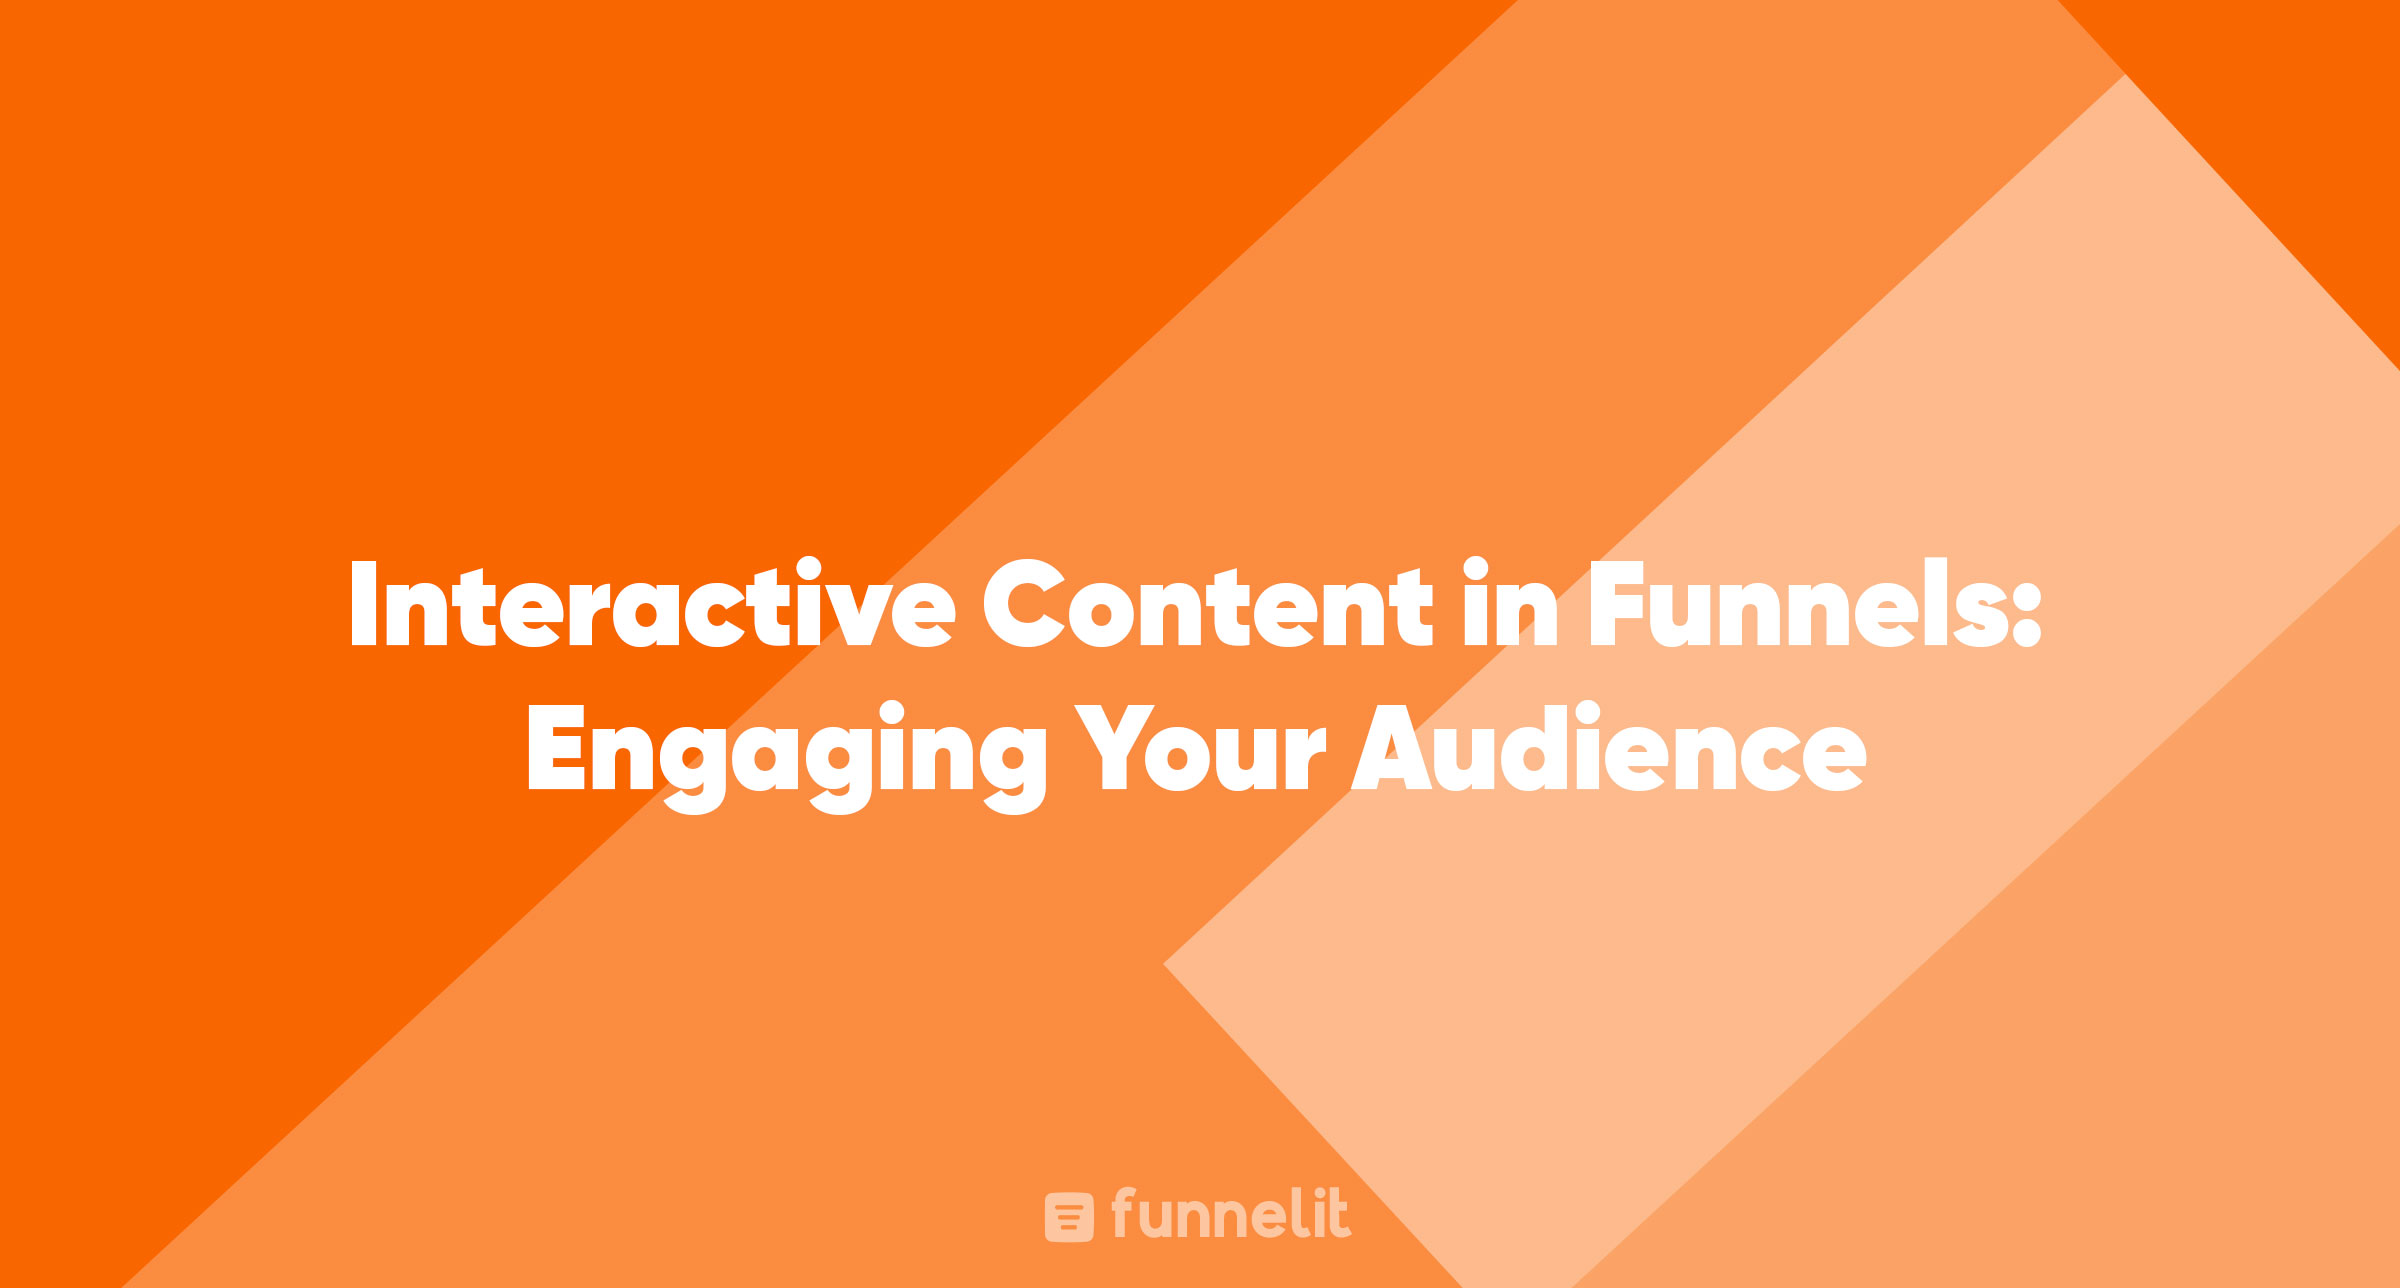 Article | Interactive Content in Funnels: Engaging Your Audience